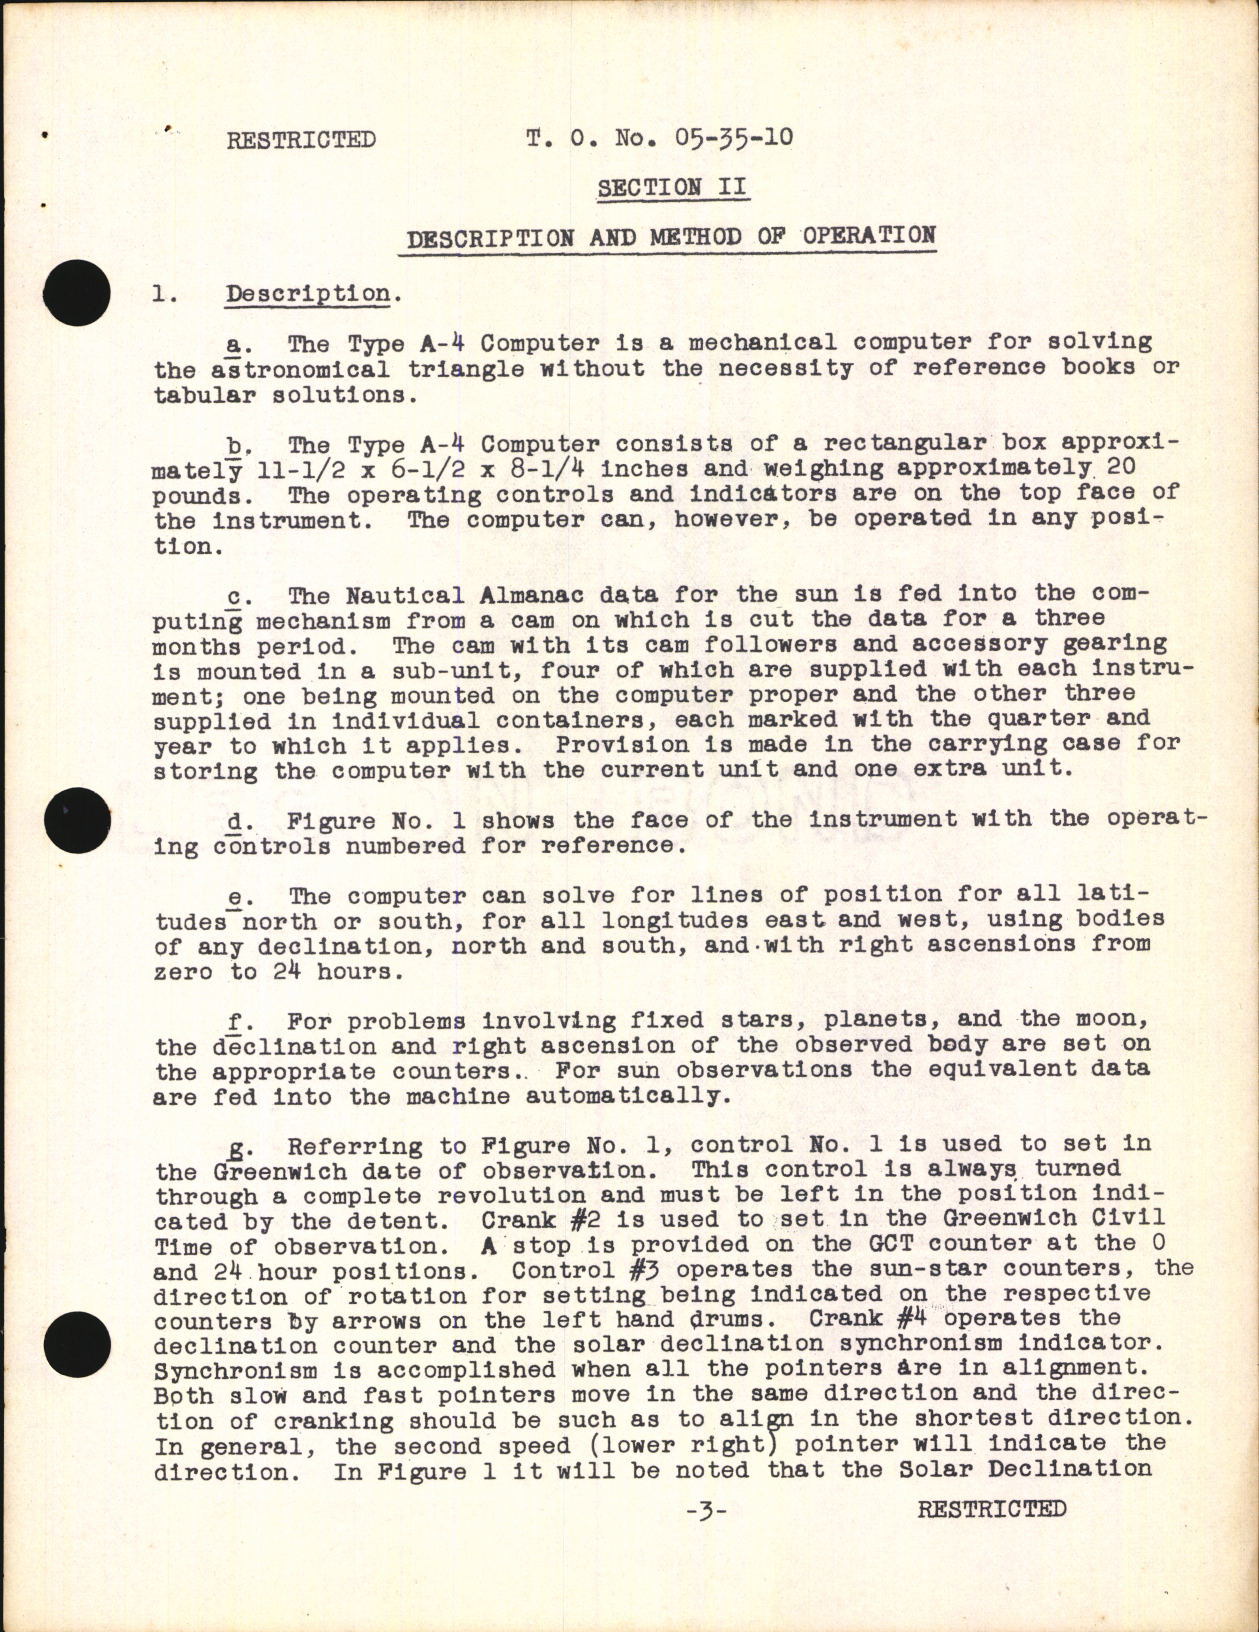 Sample page 5 from AirCorps Library document: Service Instructions for Type A-4 Line of Position Computer